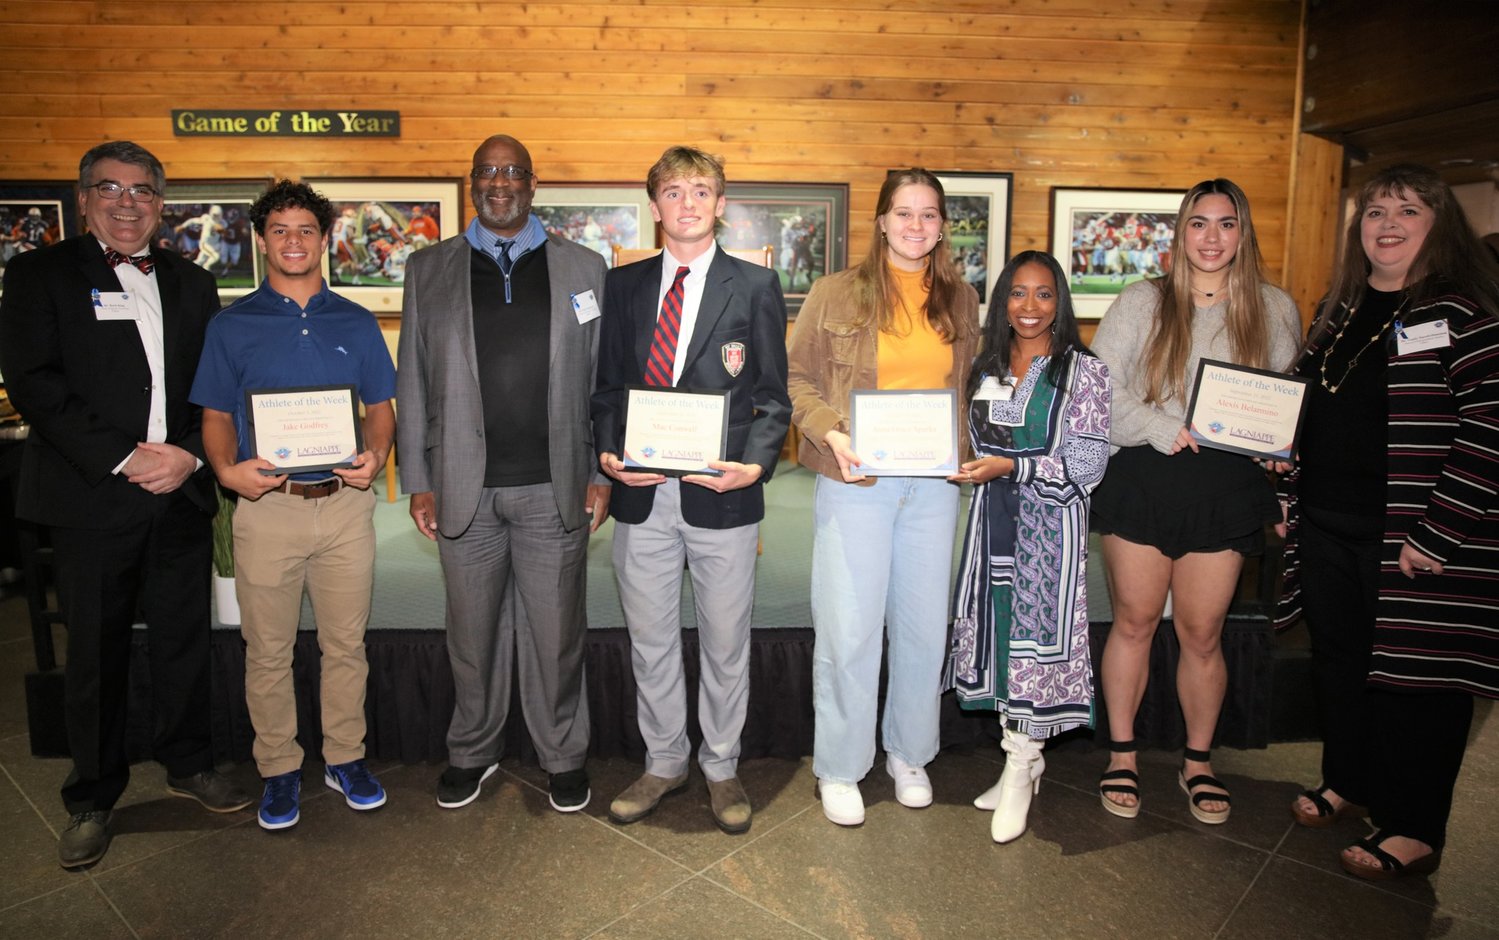 Spanish Fort’s Jacob Godfrey, second from left, and Alexis Belarmino, second from right, were among the student-athletes of the week recognized at the United States Sports Academy’s annual Awards of Sport program Thursday, Nov. 10, in Daphne.